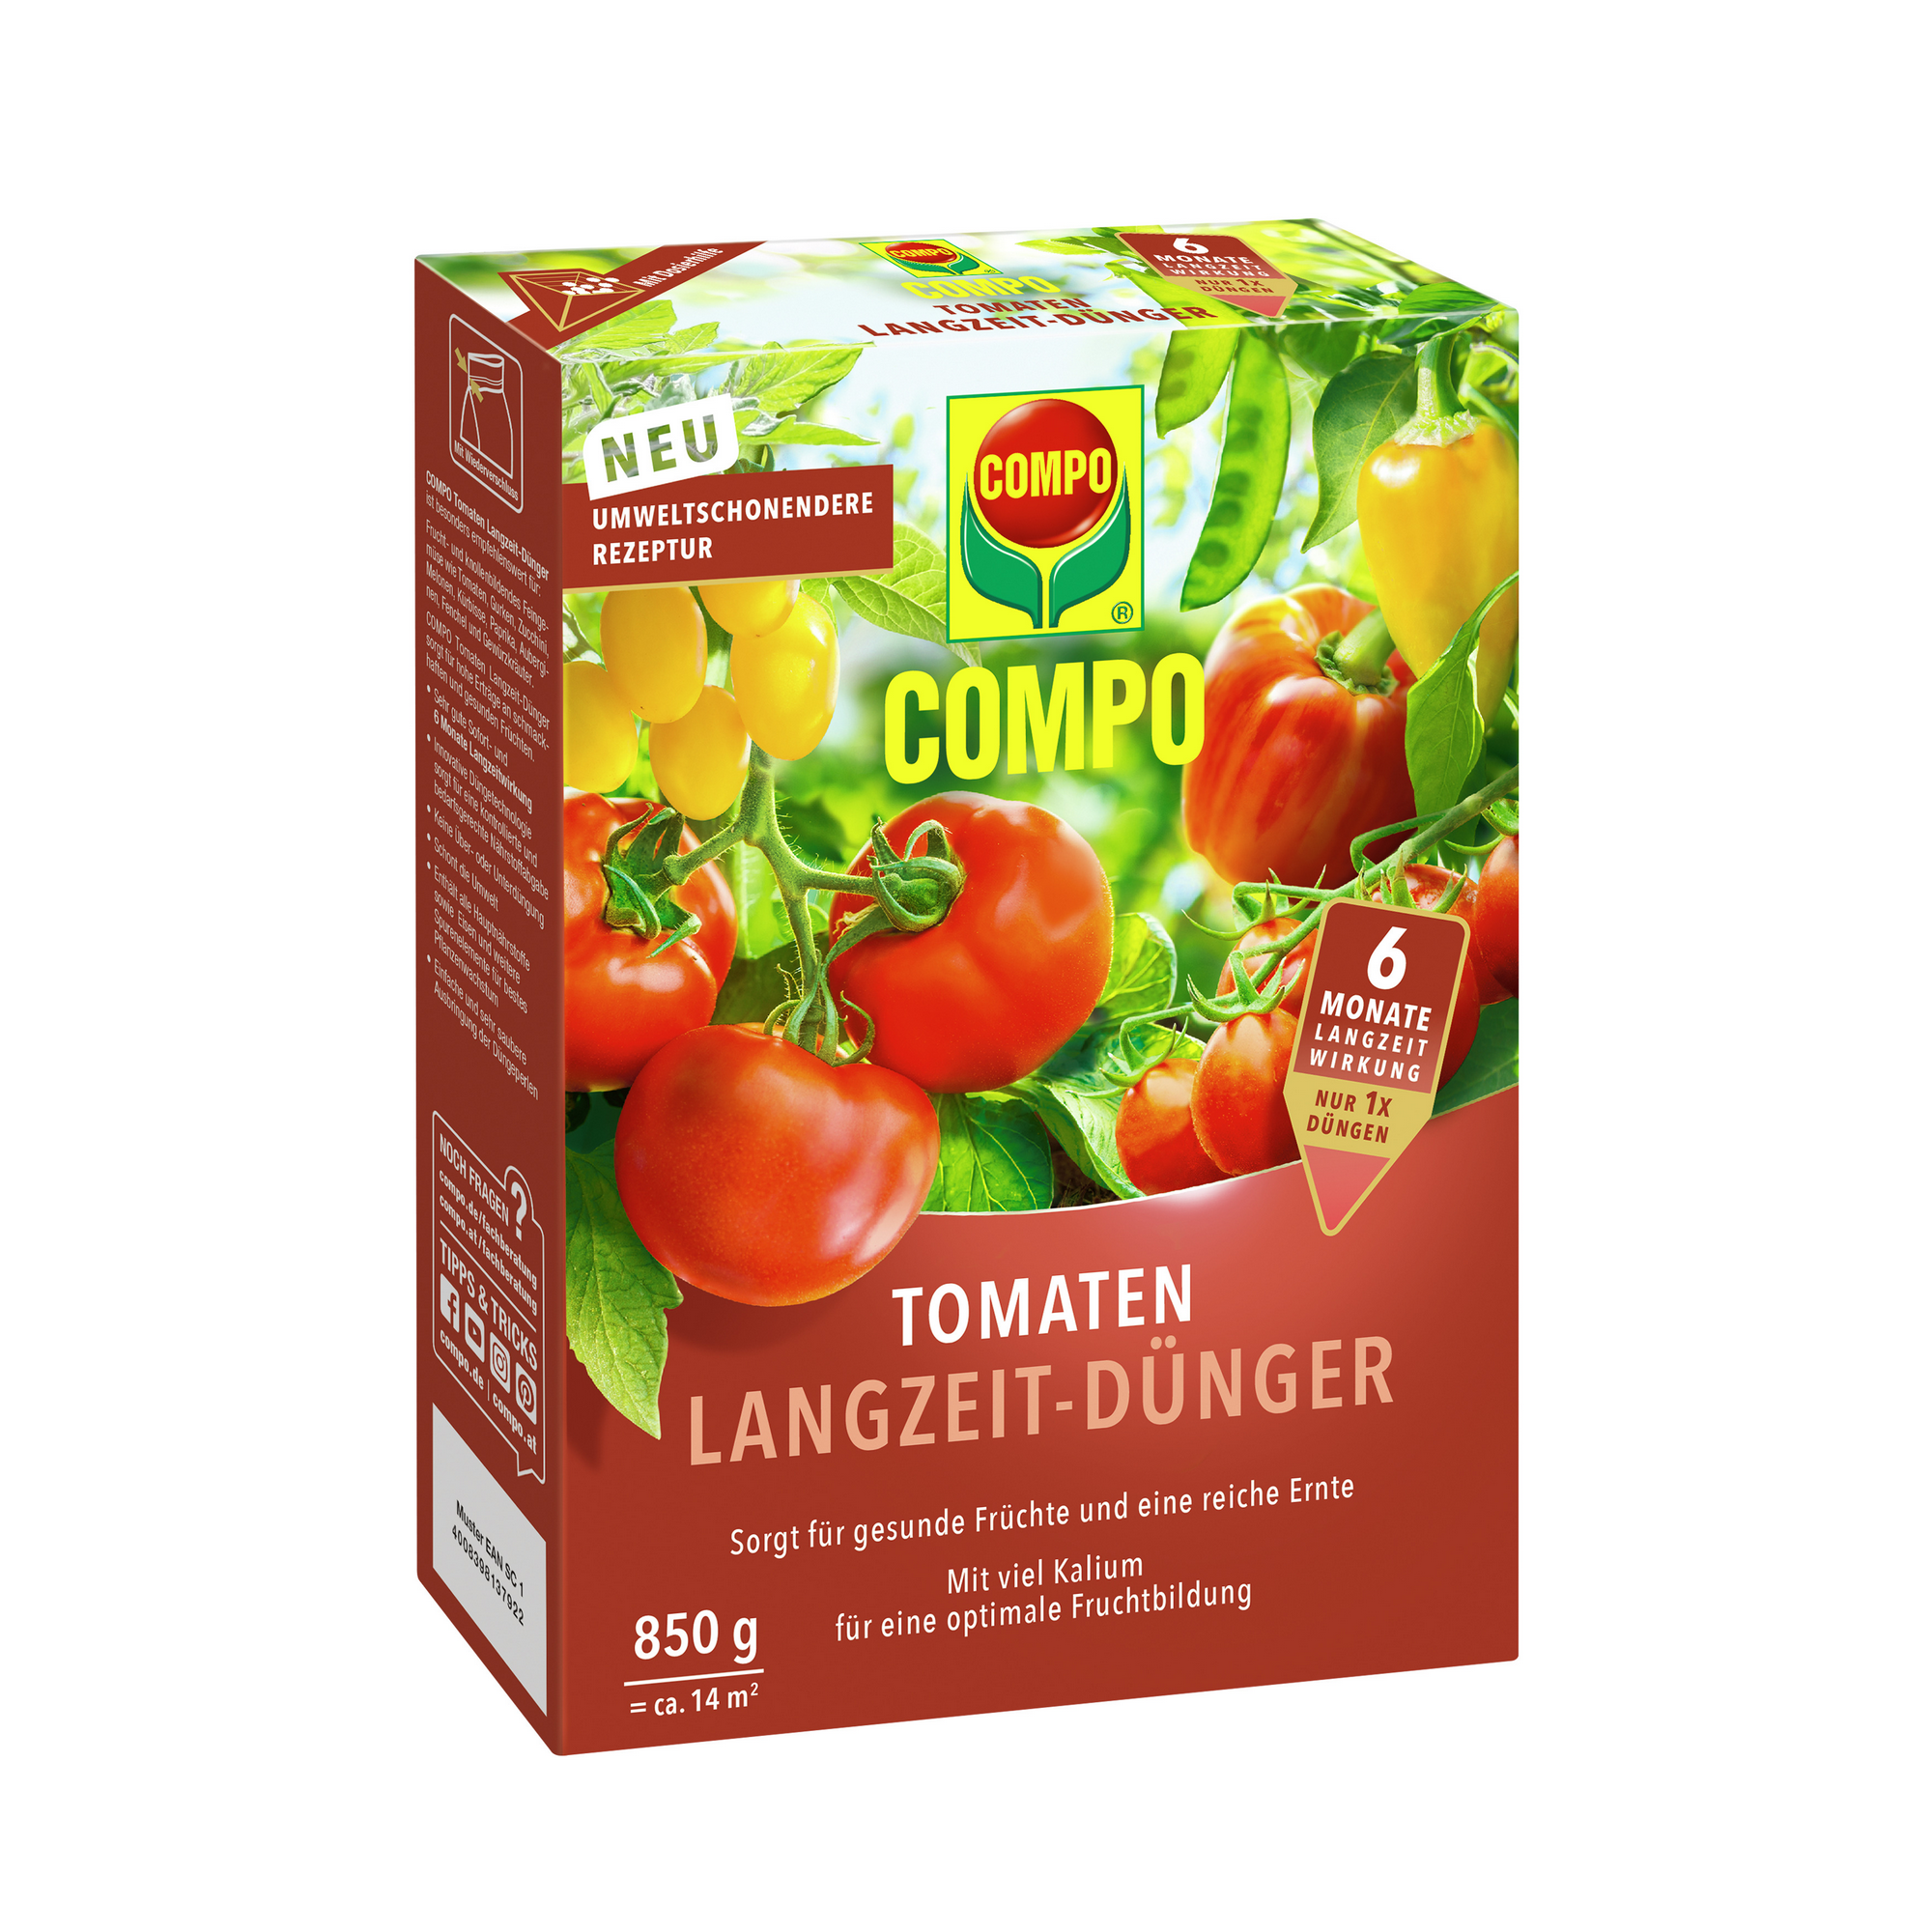 Tomaten-Langzeitdünger 850 g + product picture